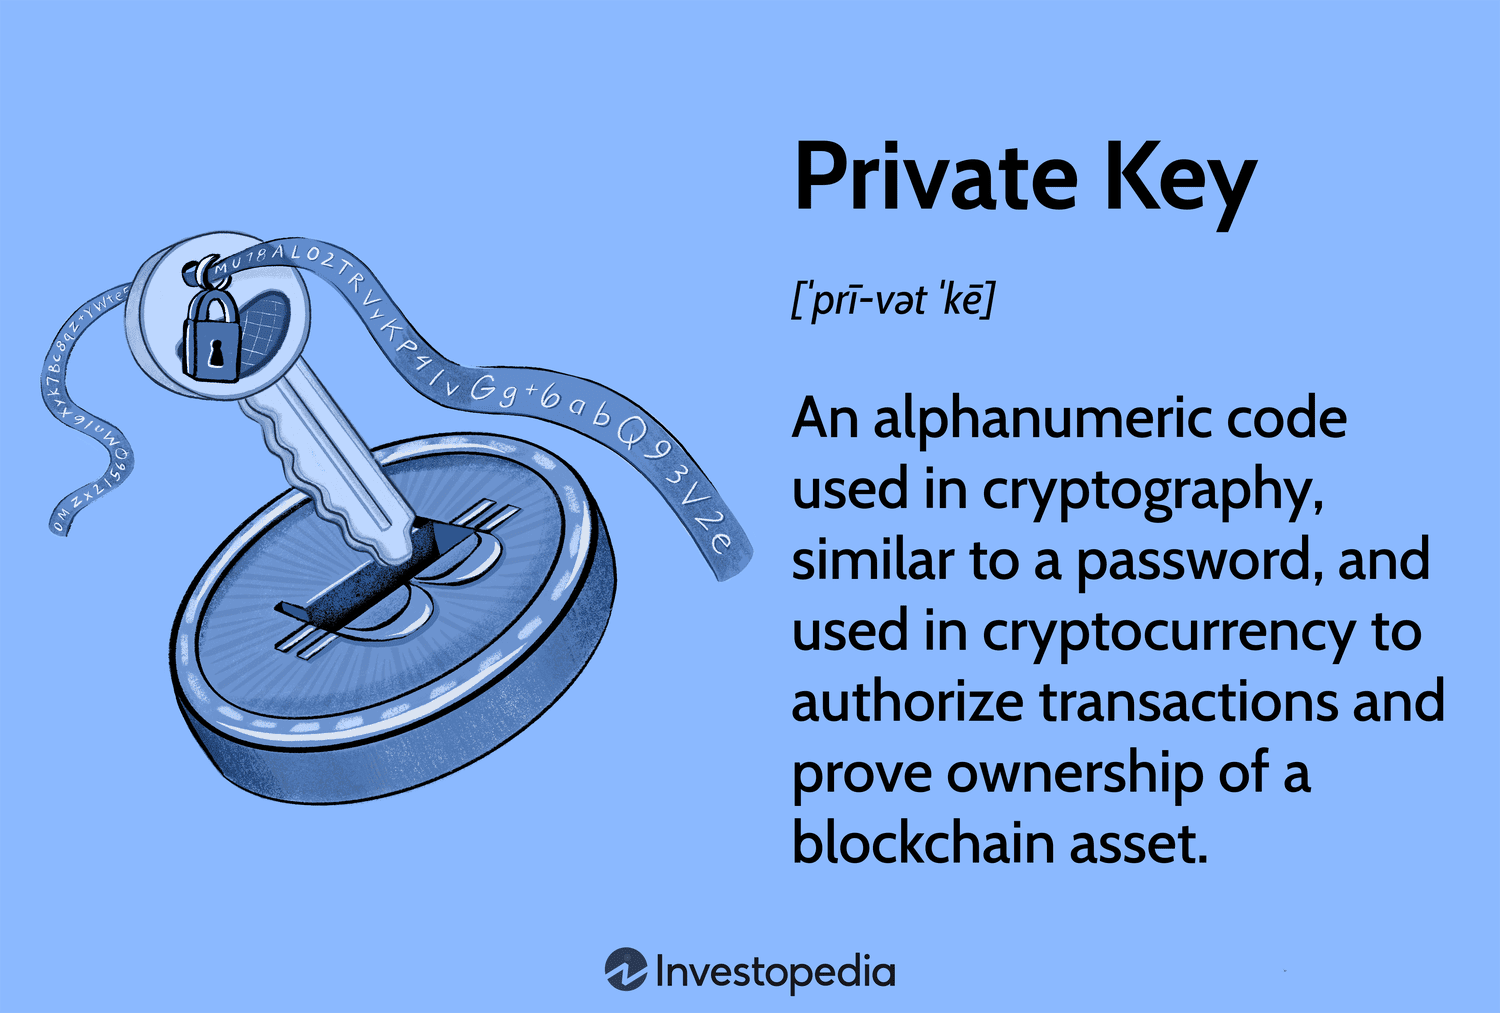 How to generate your very own Bitcoin private key